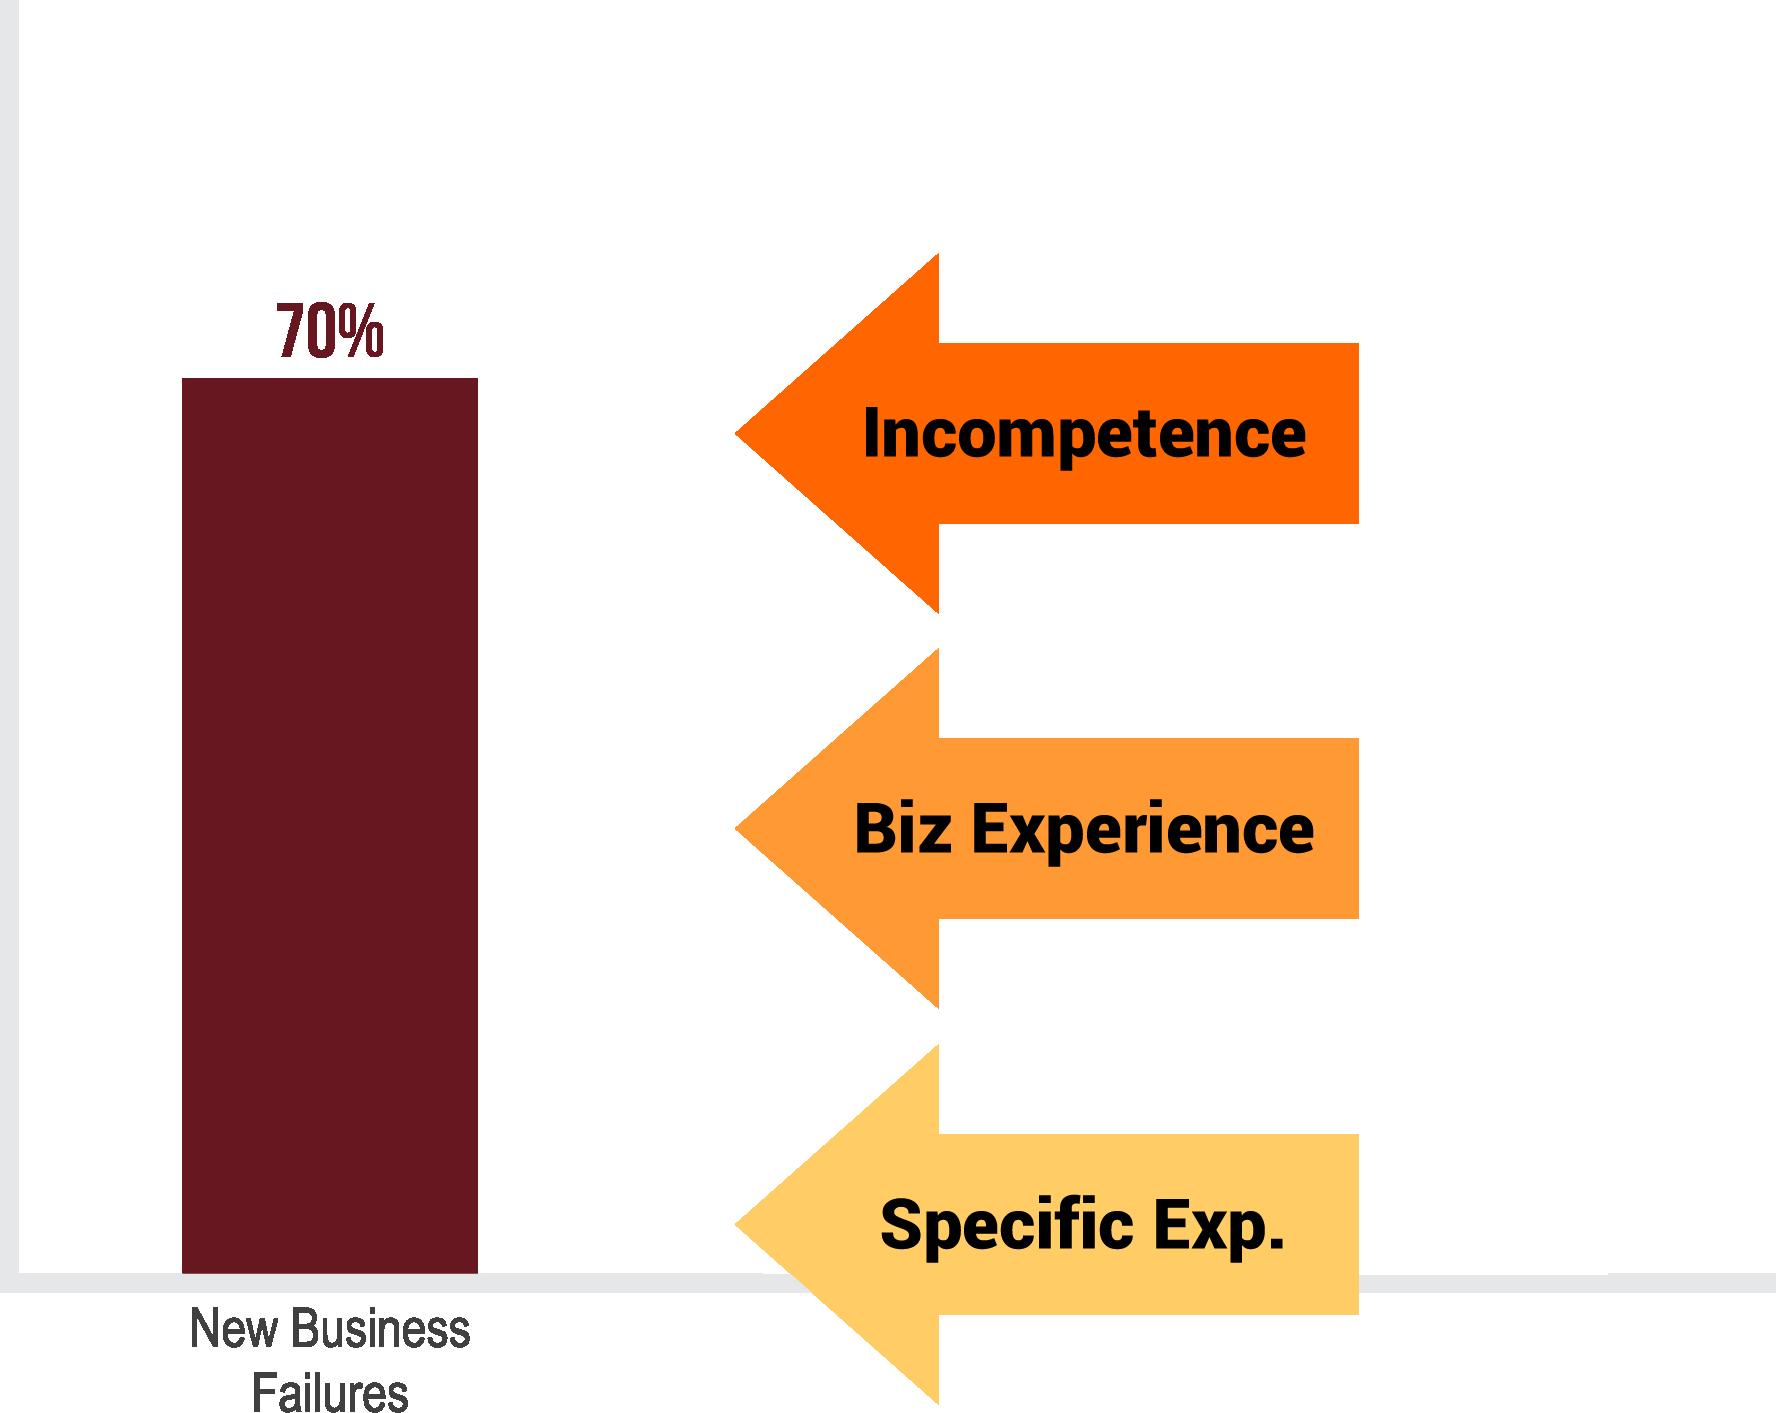 70% of businesses fail due to incompetence, lack of industry knowledge, or lack of business knowledge